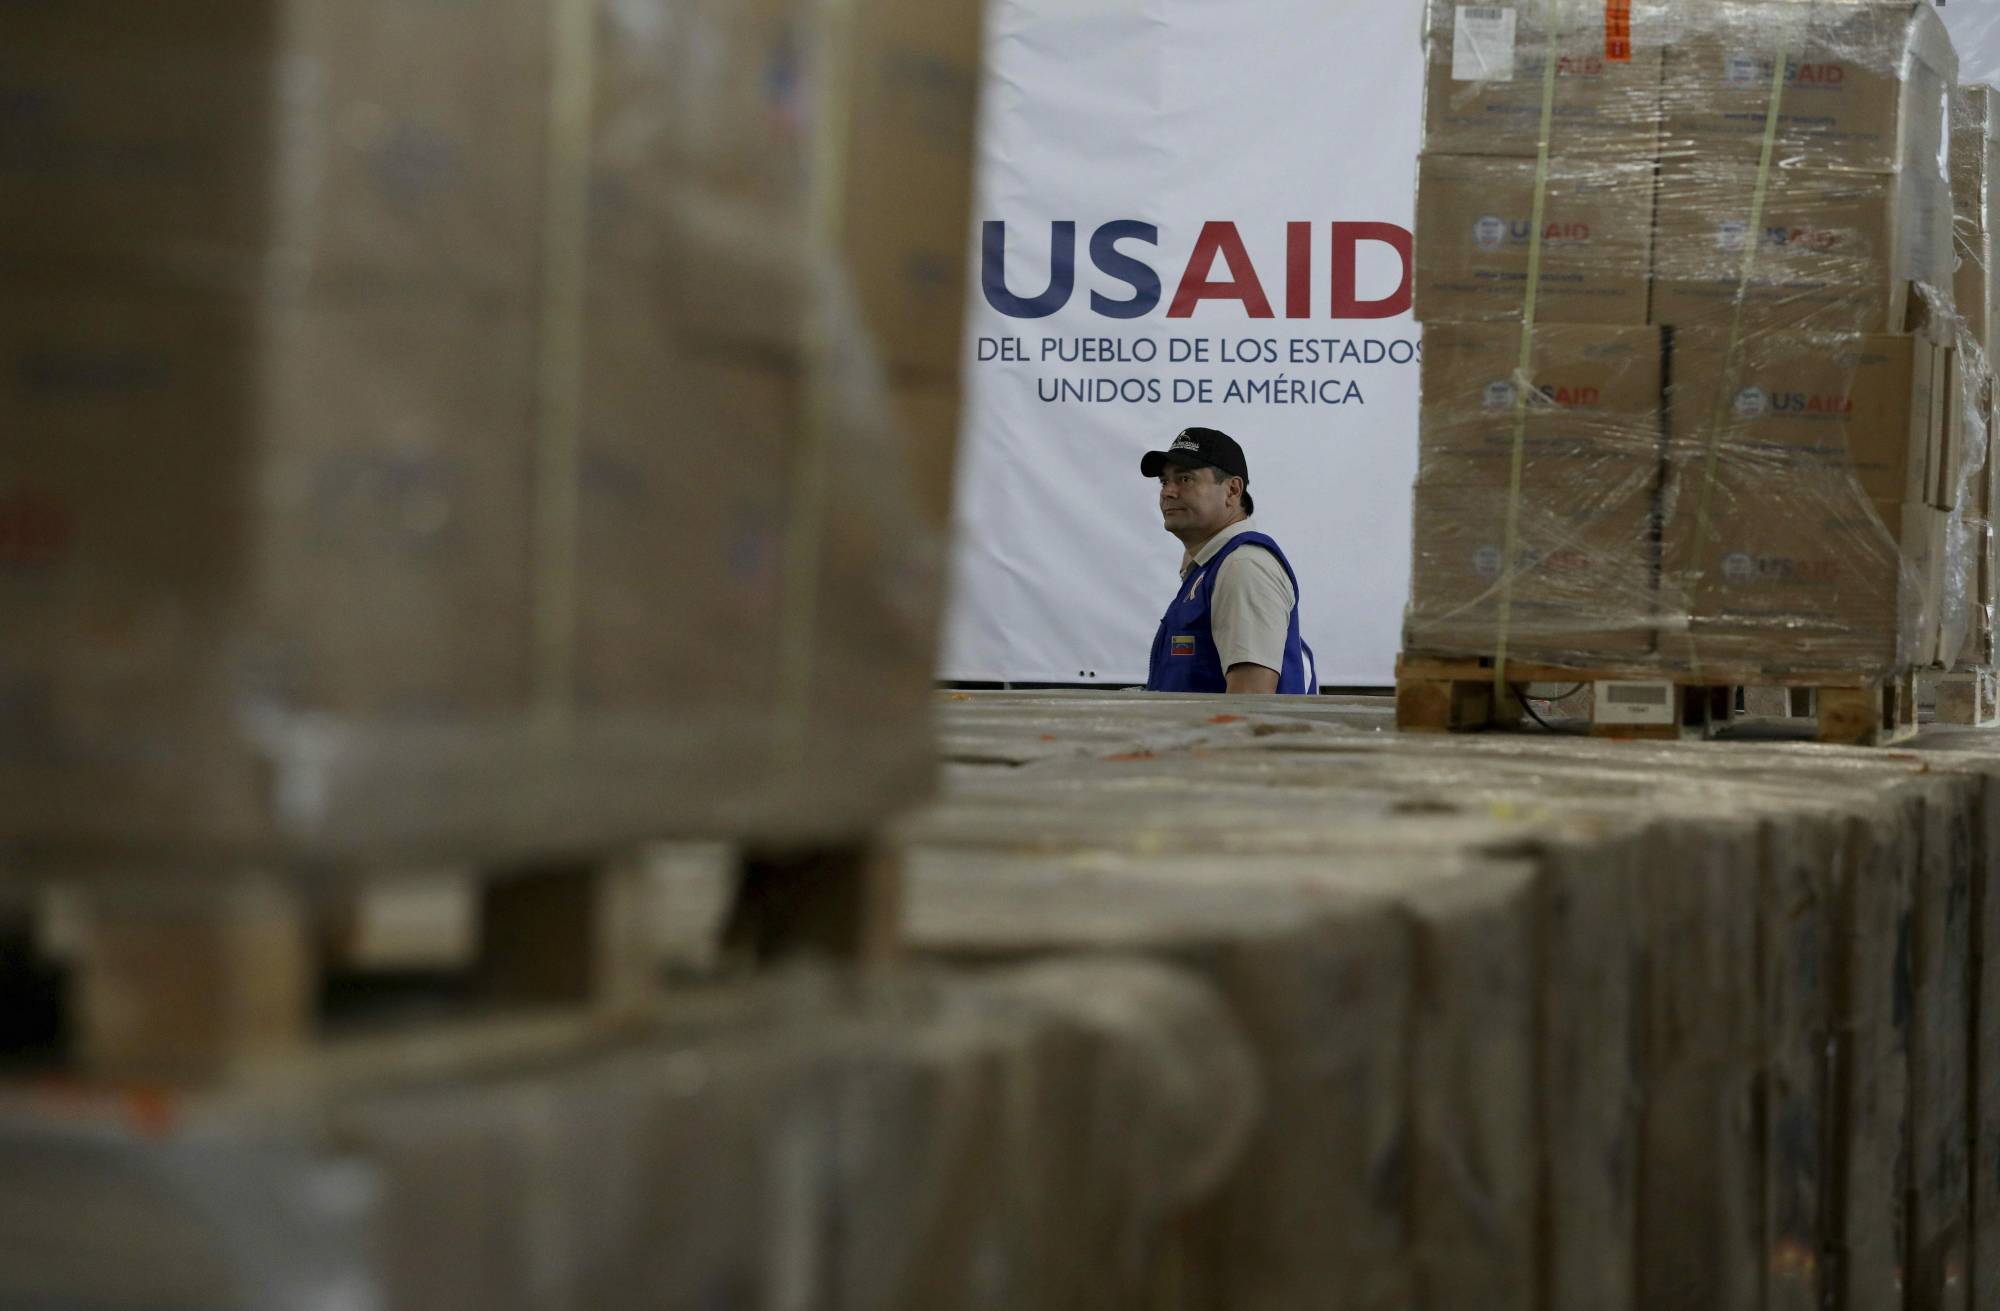 A man walks past boxes of USAID humanitarian aid at a warehouse at the Tienditas International Brigde on the outskirts of Cucuta, Colombia, Thursday, Feb. 21, 2019, on the border with Venezuela. Venezuela's President Nicolas Maduro said he’s weighing whether to shut down the border with Colombia, where the bulk of aid meant for Venezuela is being stockpiled and exiled leaders have been gathering ahead of a fundraising concert Friday. (AP Photo/Fernando Vergara)